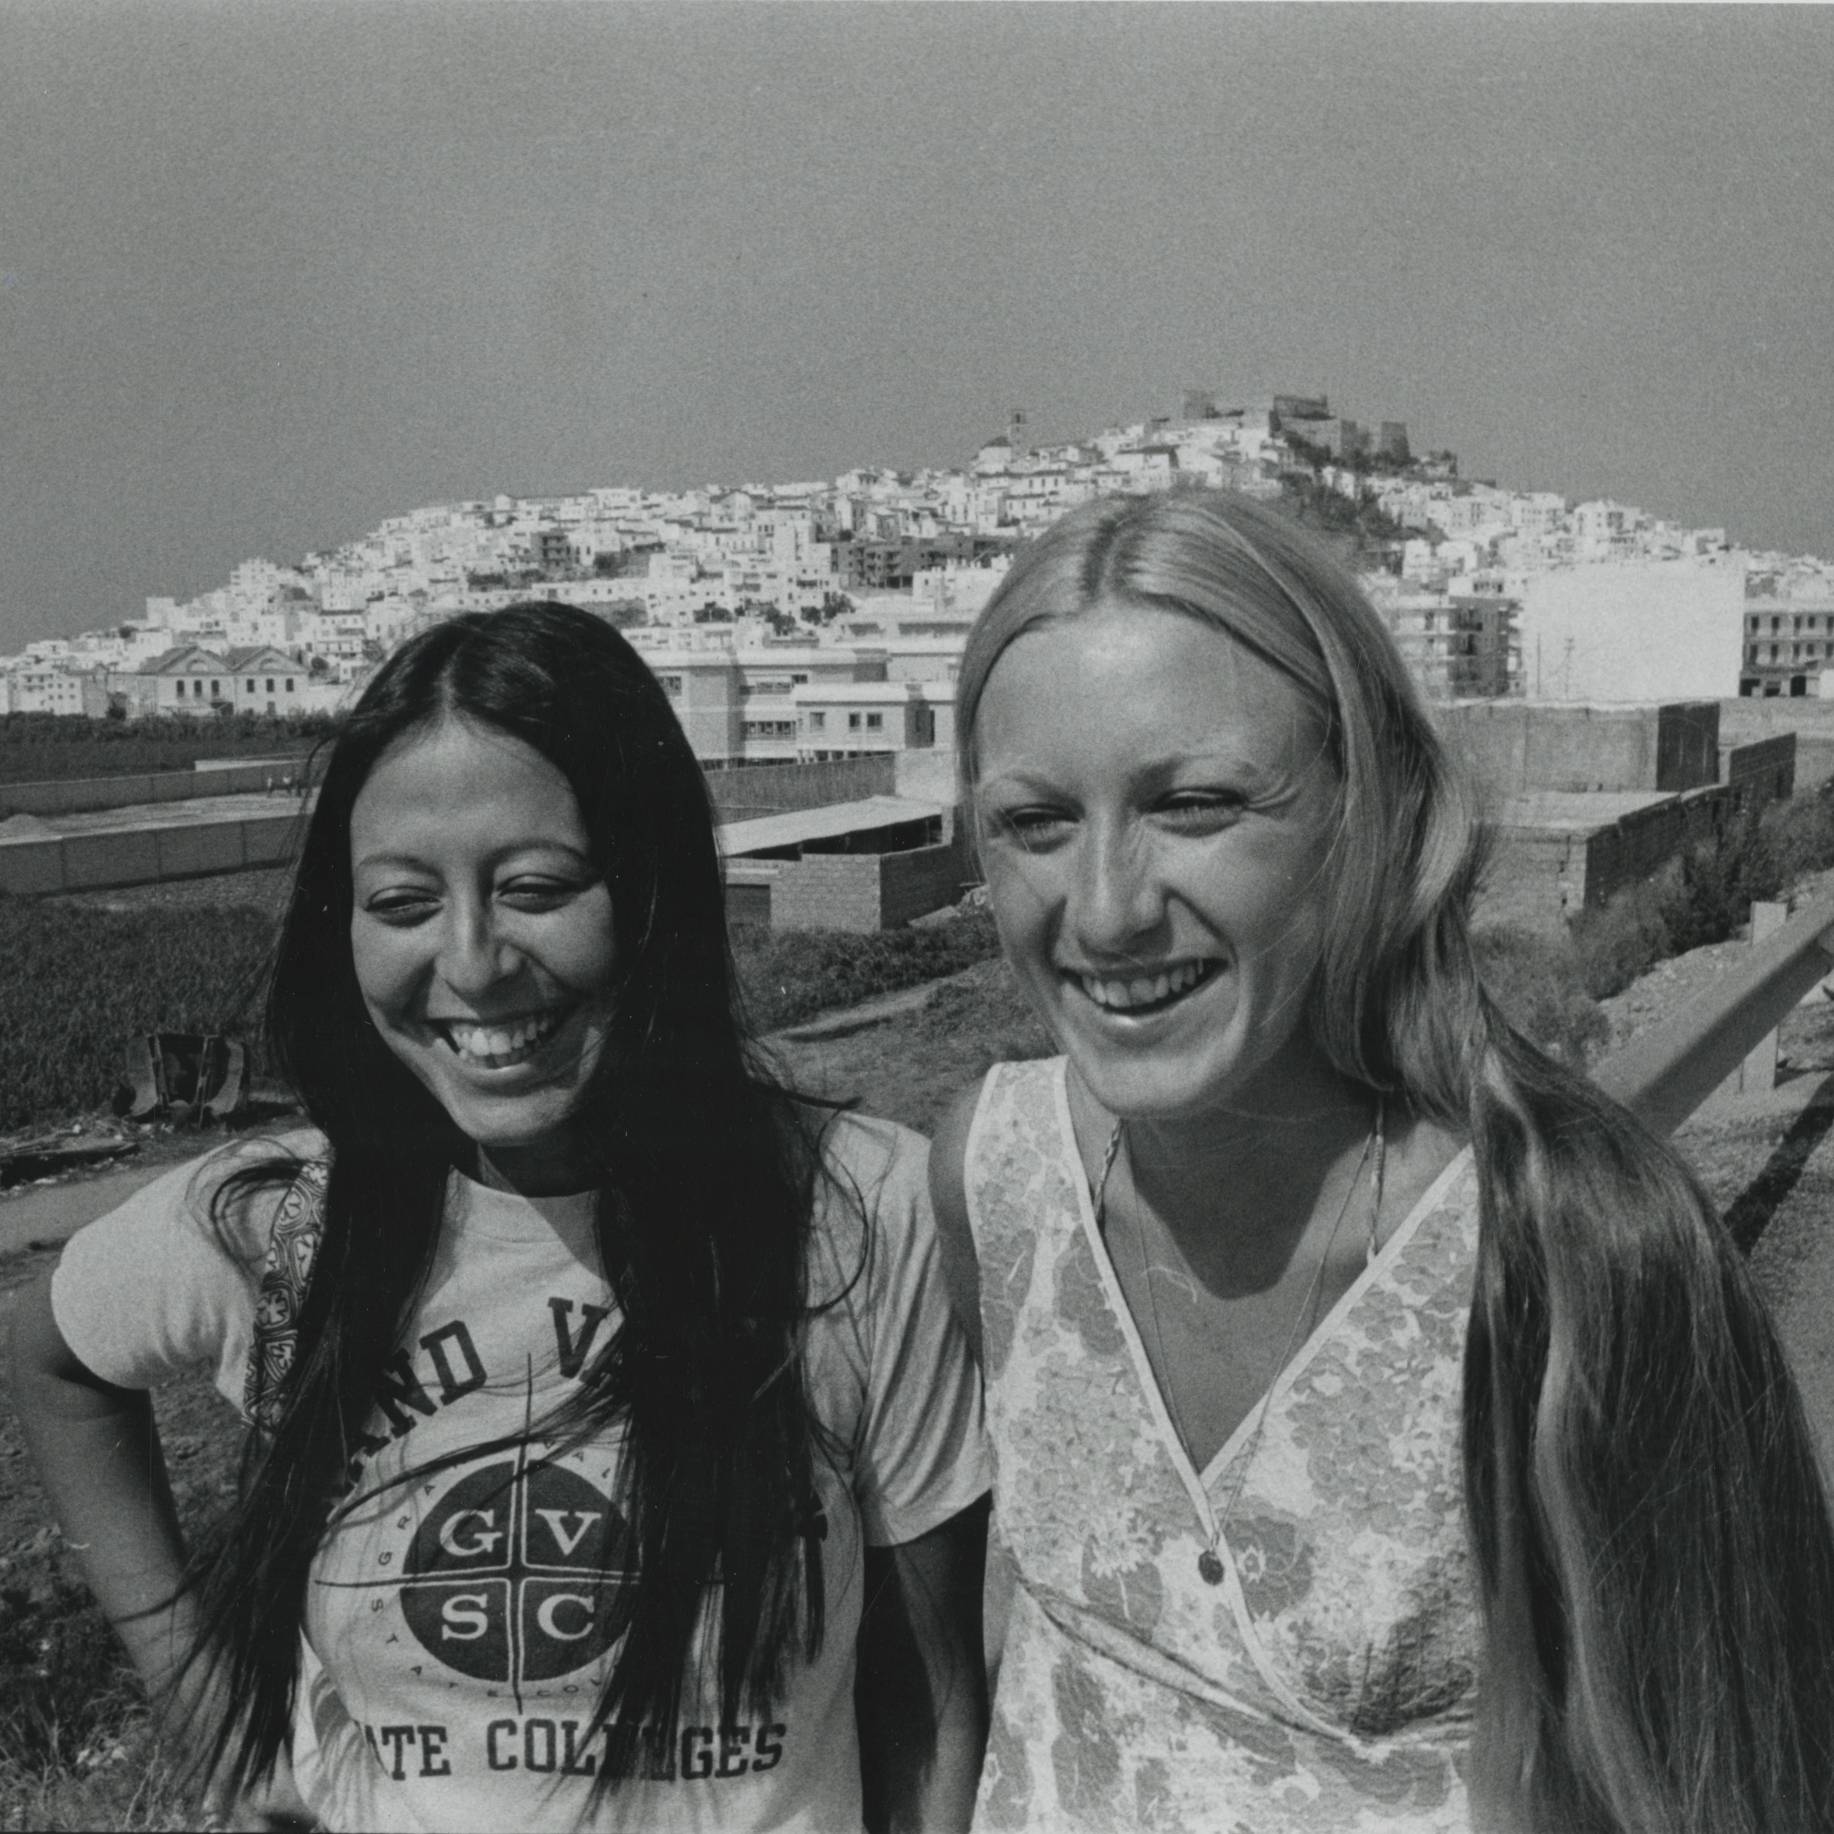 black and white photograph of young women in standing in front of cityscape wearing GVSC shirts